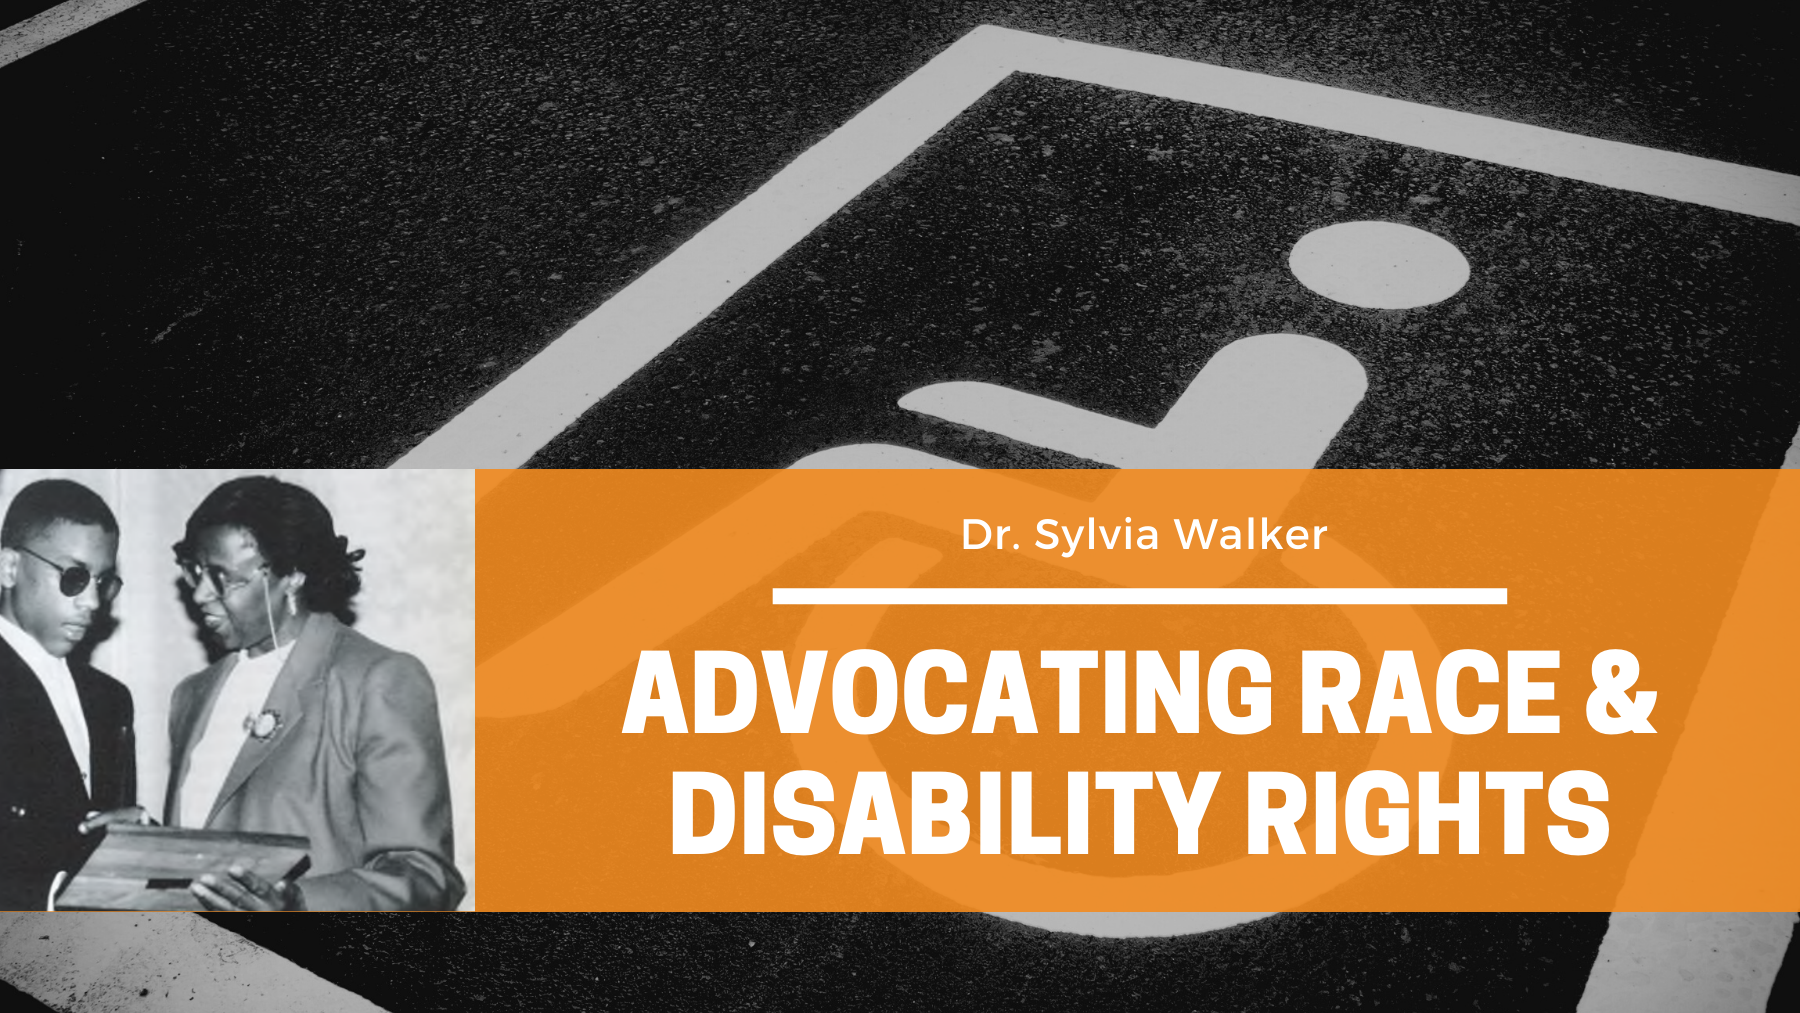 Dr. Sylvia Walker: Advocating Race & Disability Rights